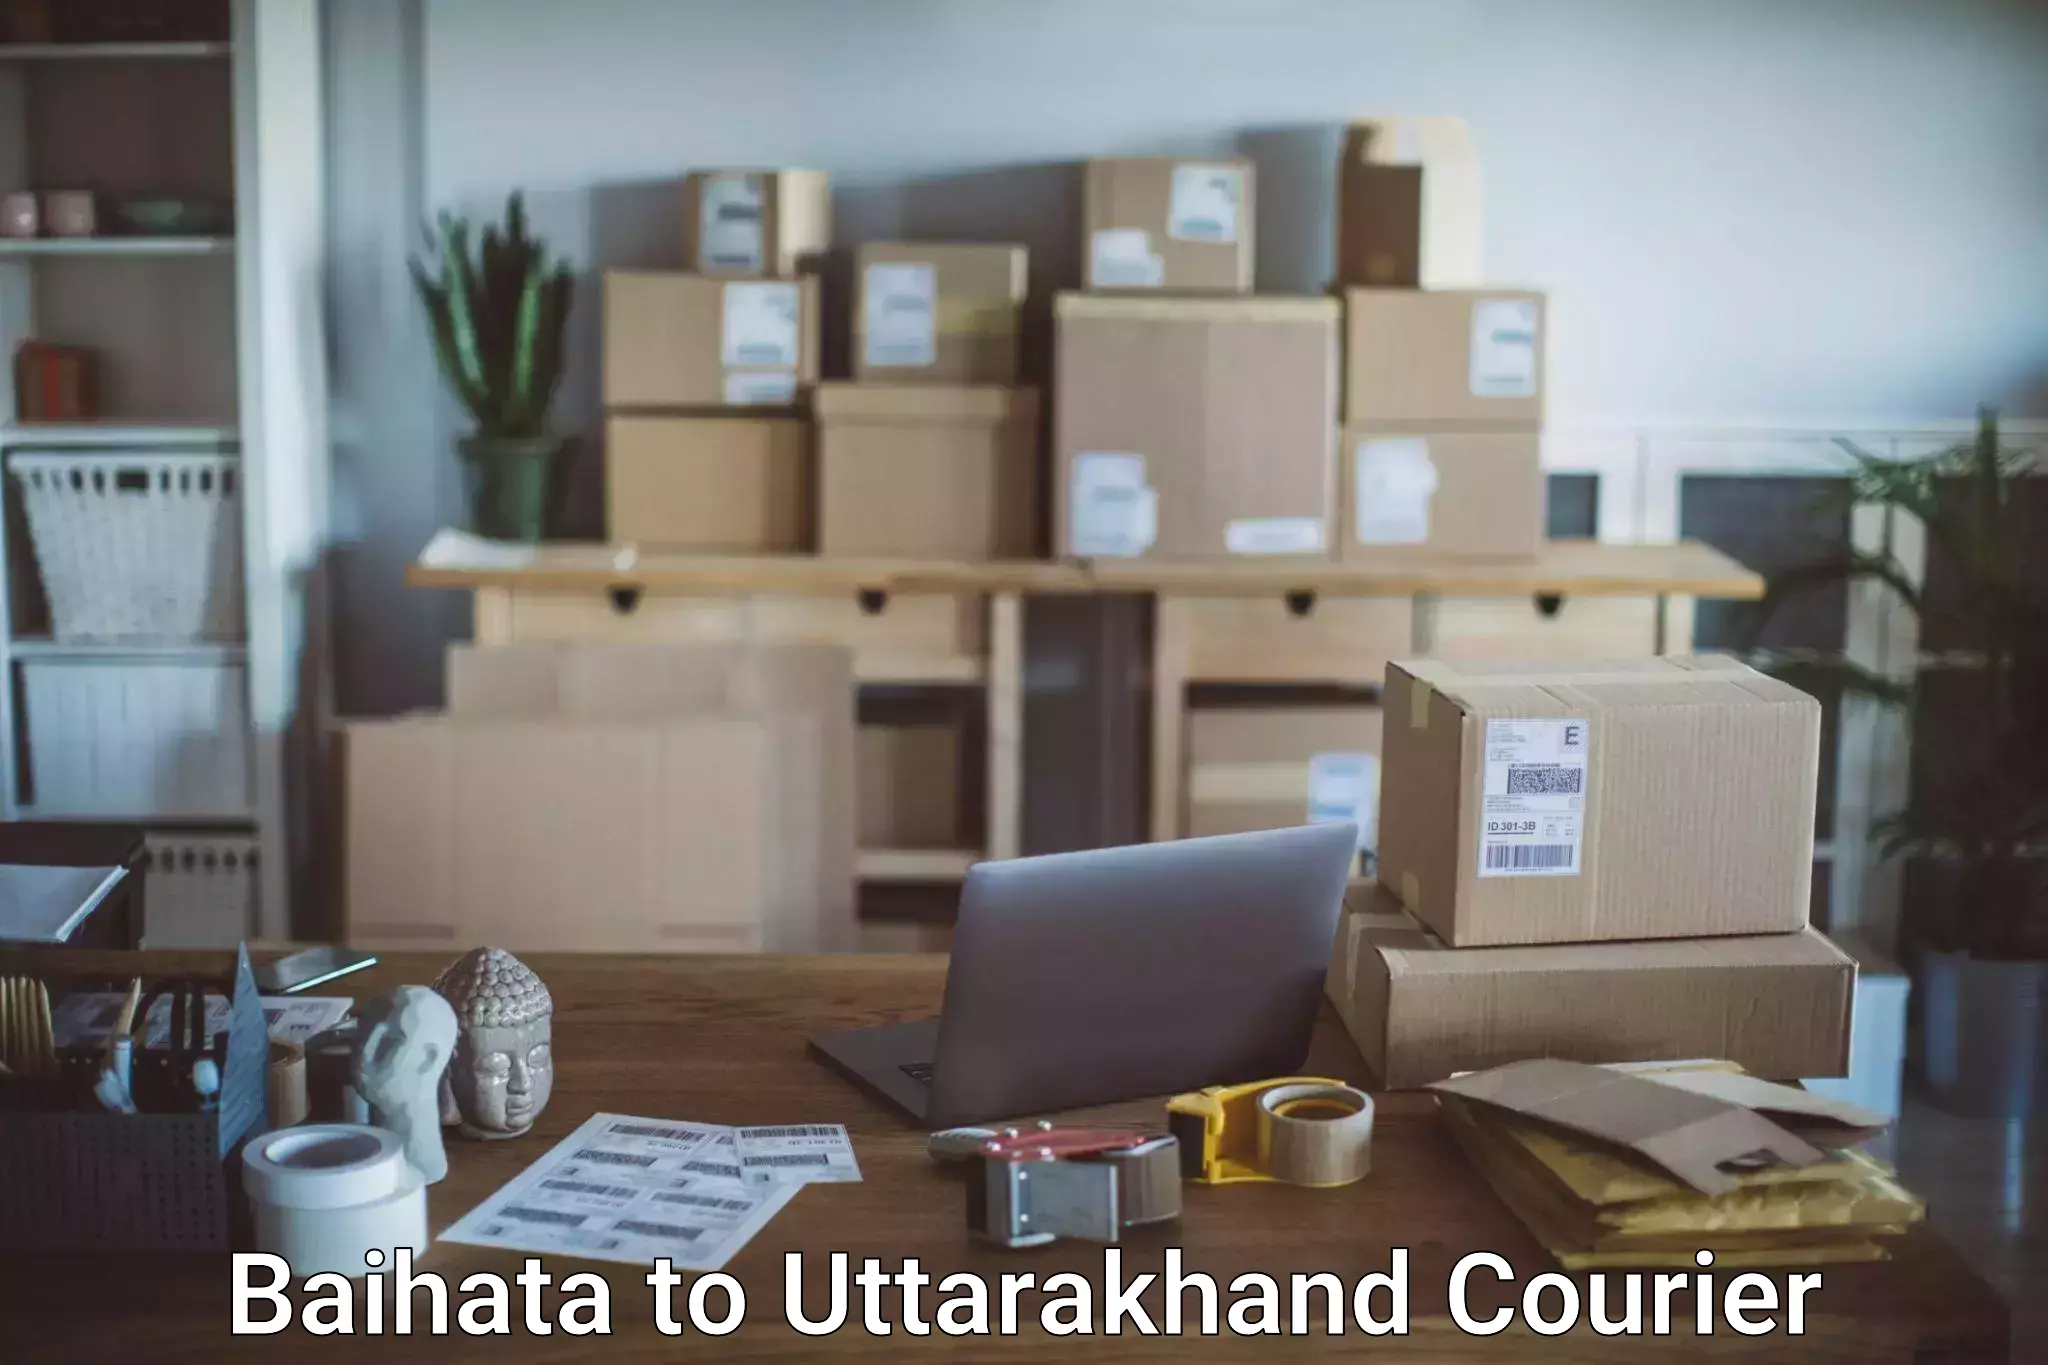 Hassle-free luggage shipping in Baihata to Kashipur